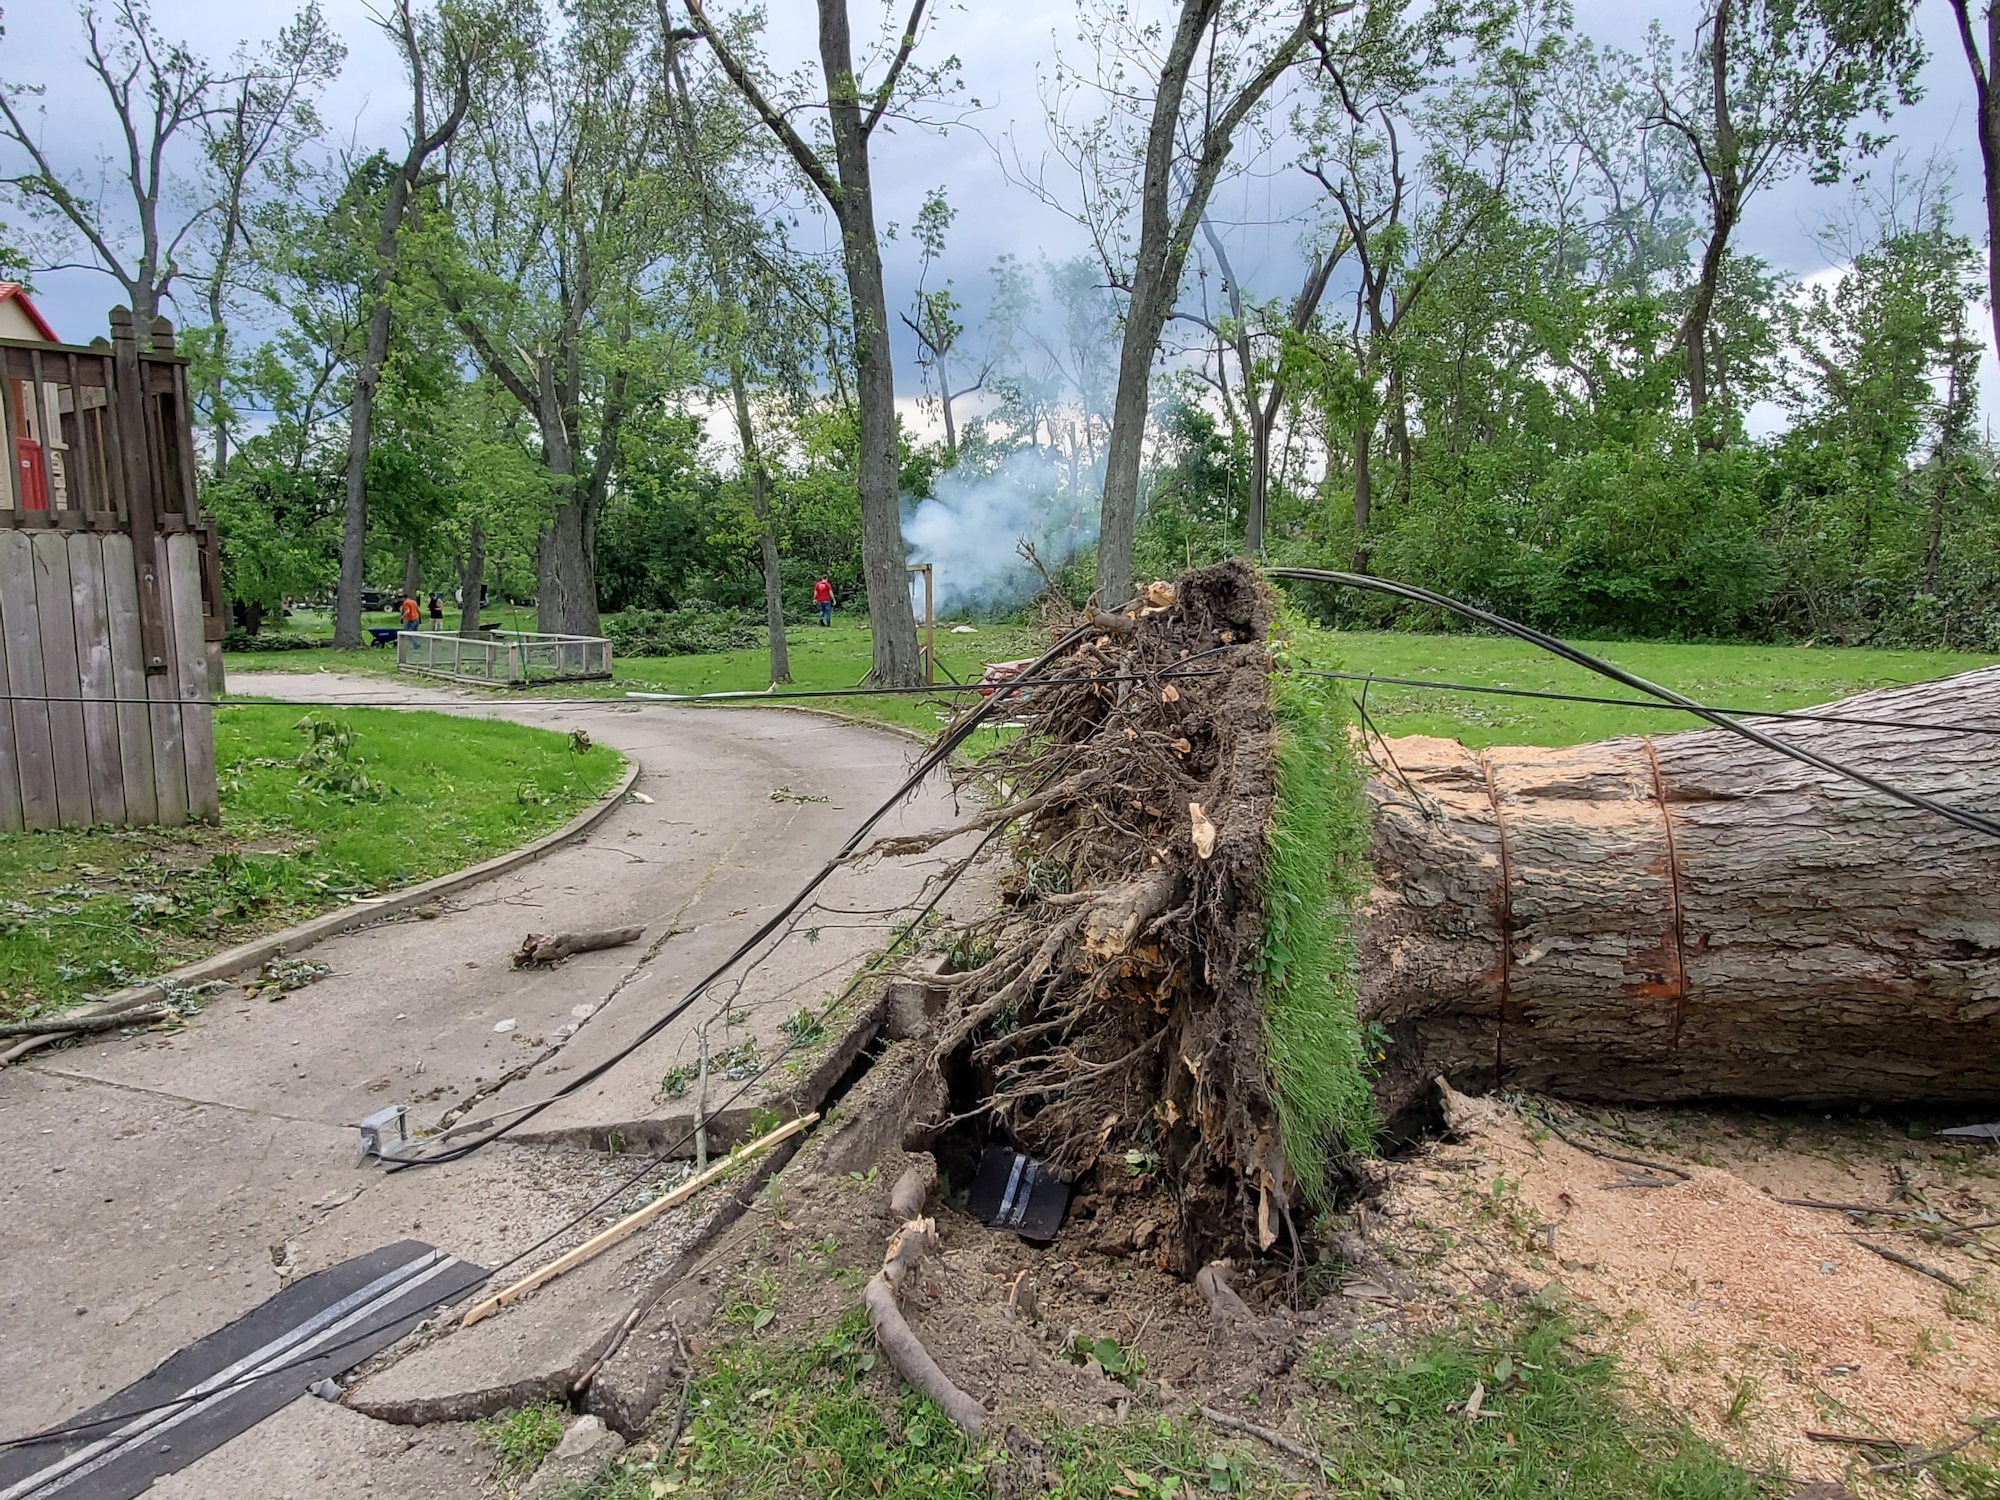 Air Force Research Laboratory employees helped others in need of assistance after multiple tornadoes struck areas surrounding Wright-Patterson Air Force Base during the evening of Memorial Day 2019. Trees were uprooted, roofs were torn off, and in some cases, entire structures were destroyed by the storms. (U.S. Air Force Photo/ Capt. Evan McDowell)